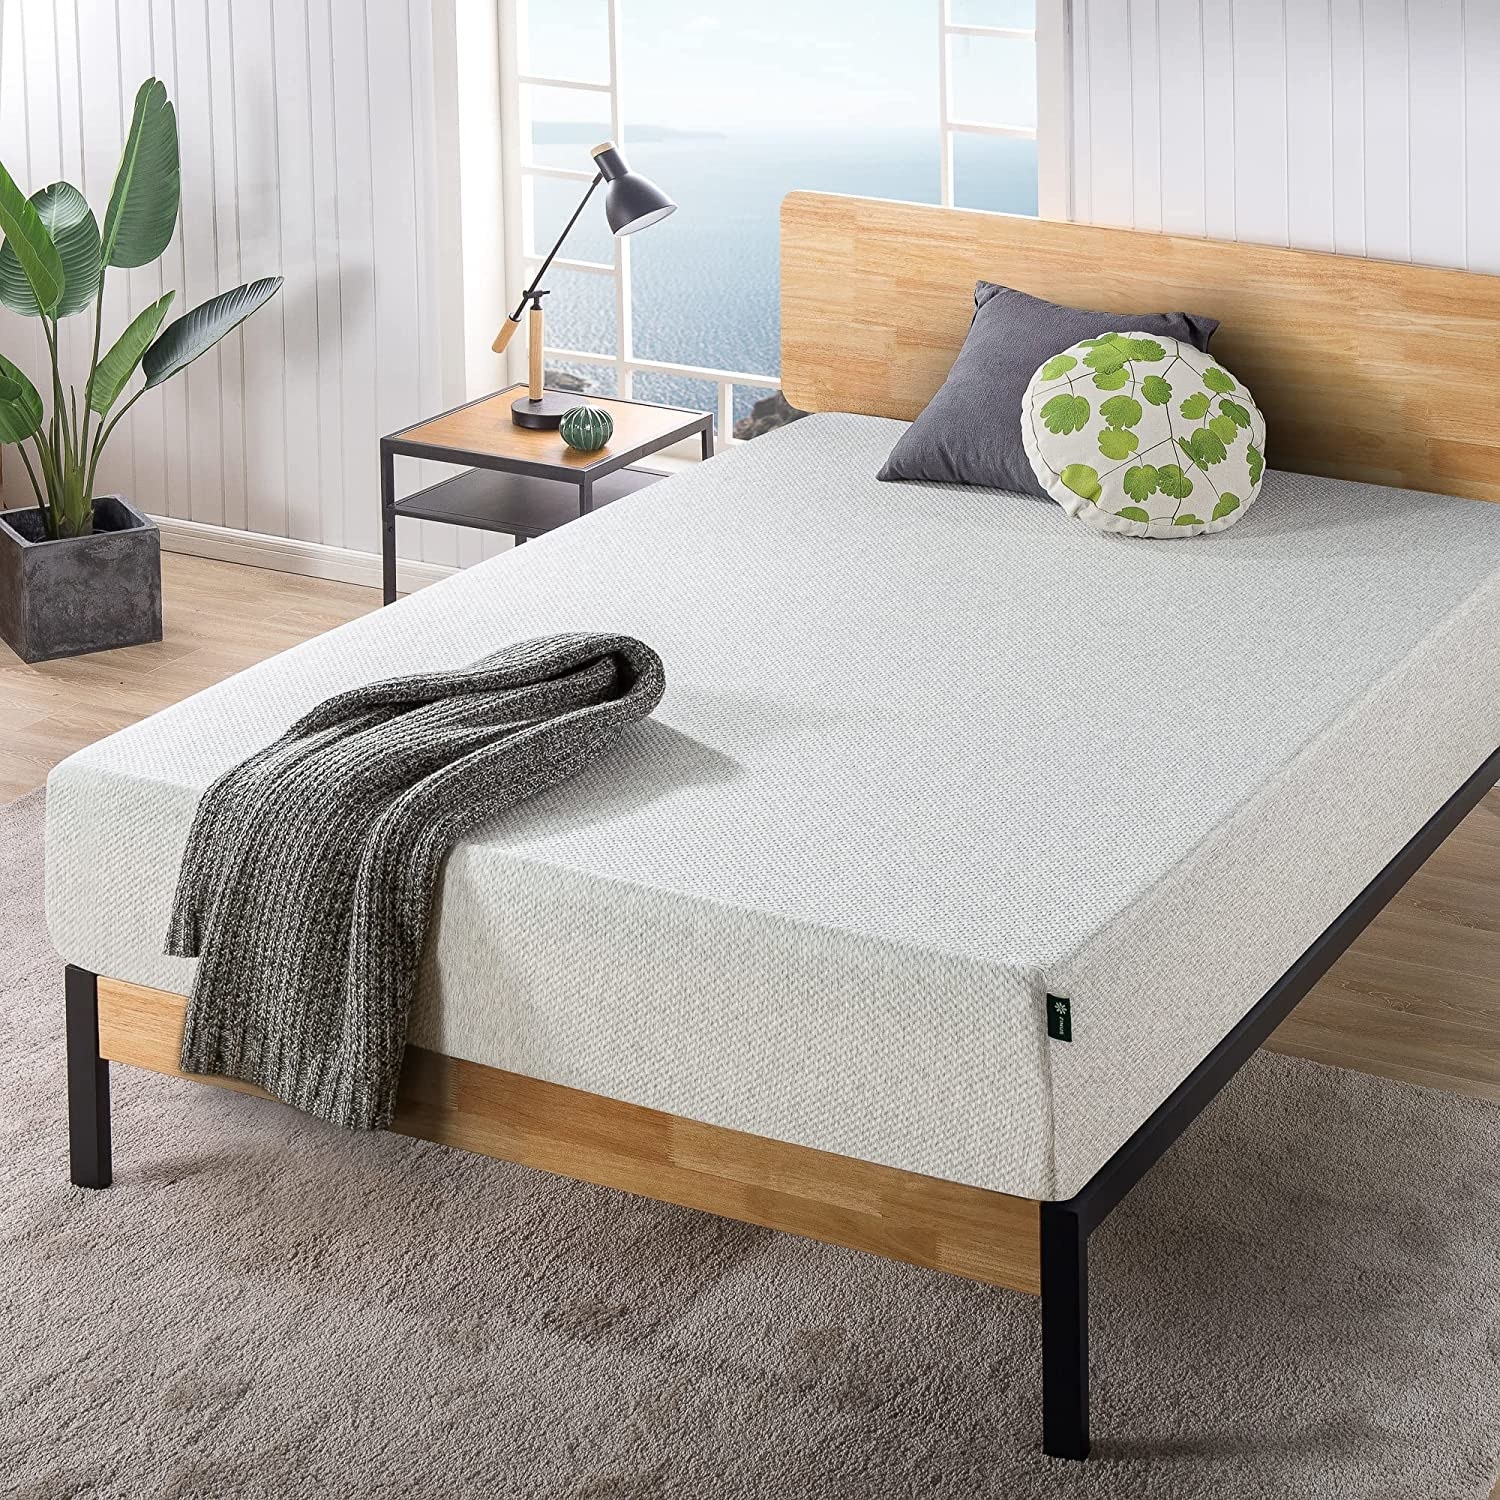 The mattress on a platform bedframe with two cushions and a throw on it